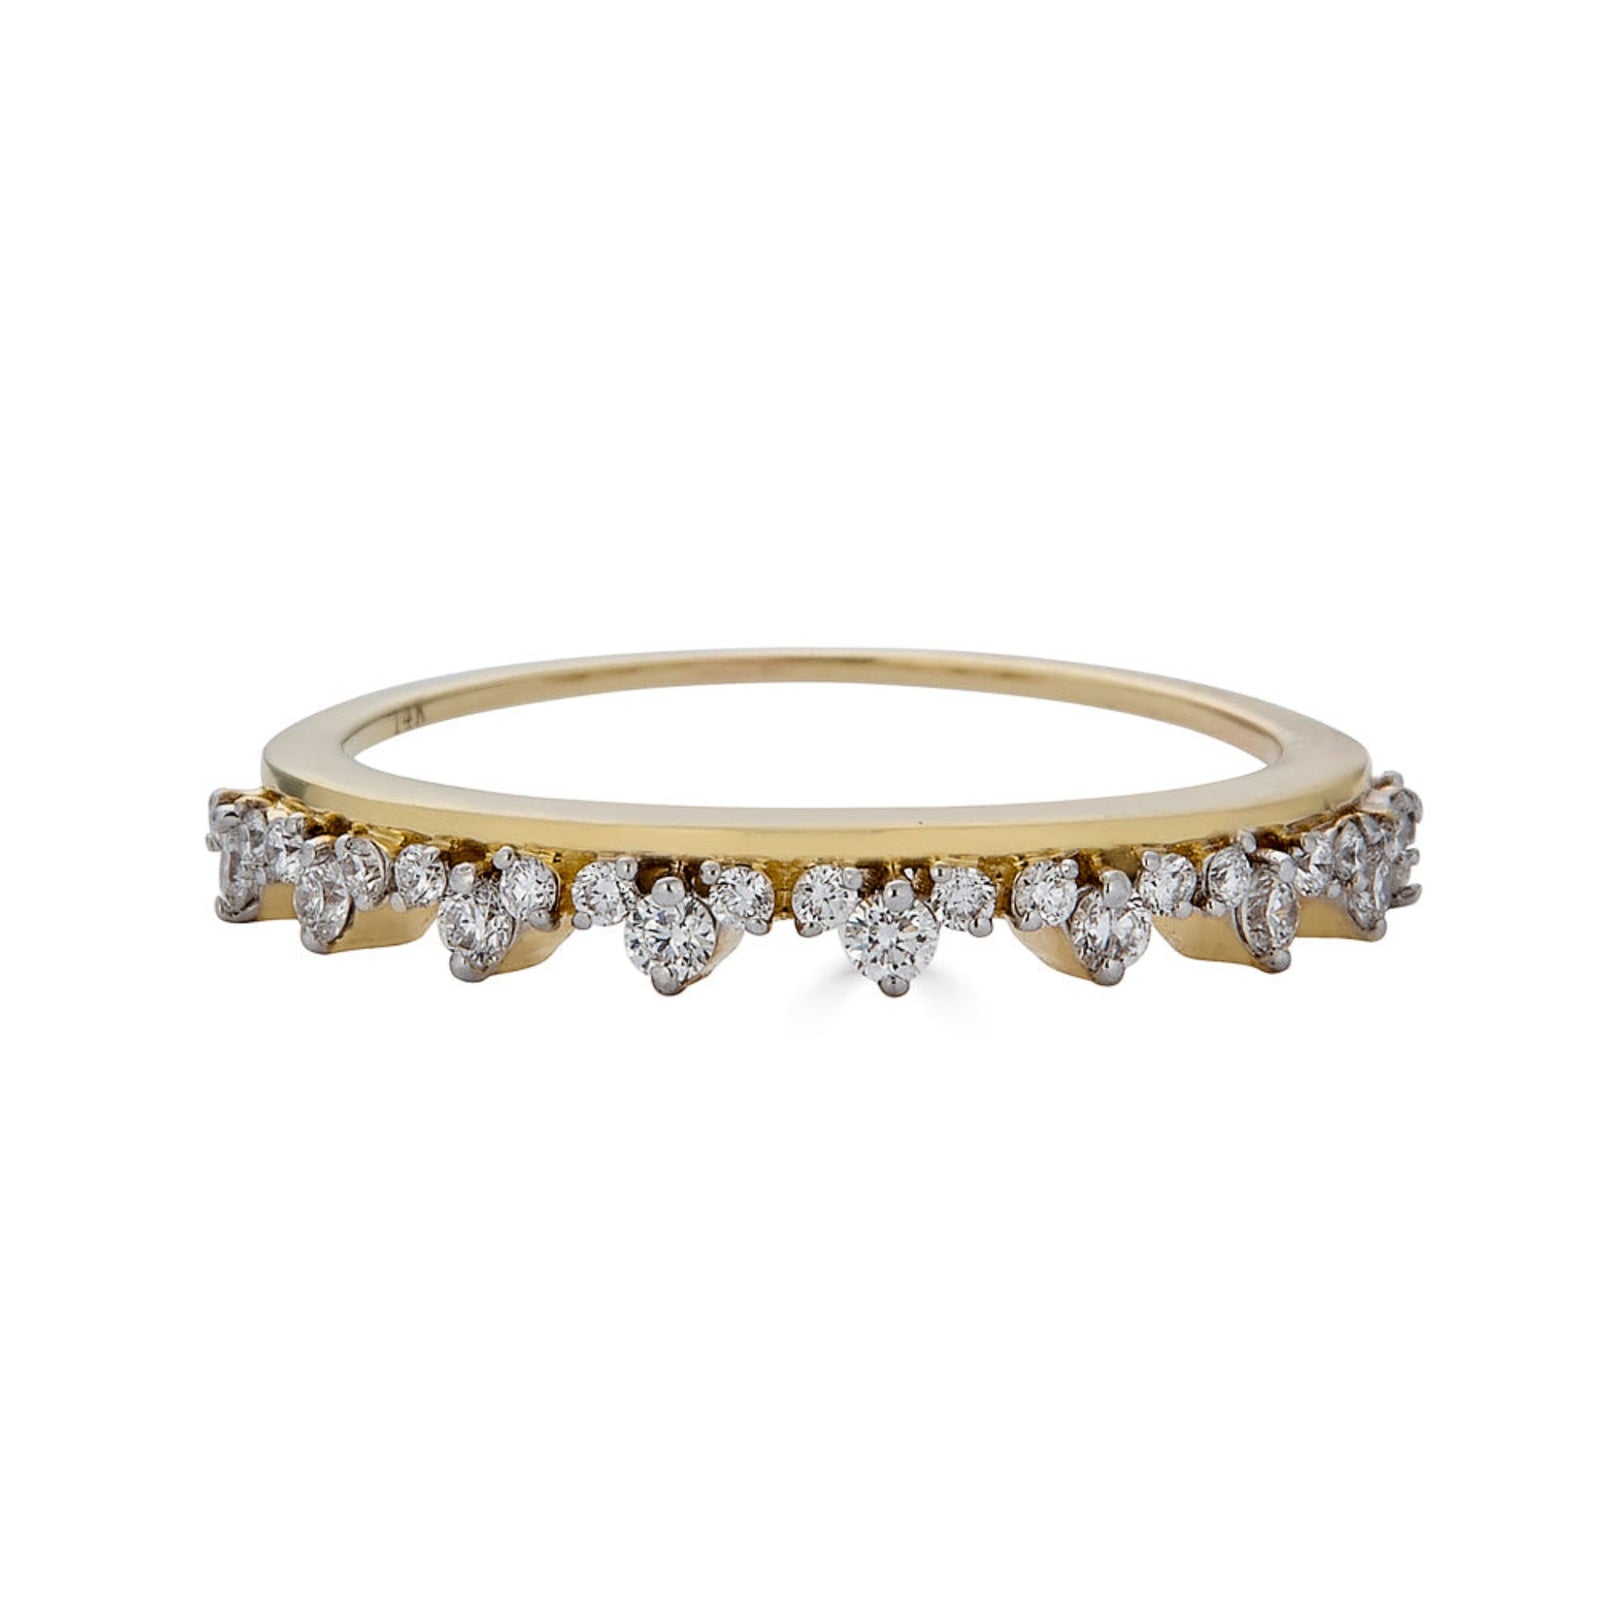 The Allegra Crown Ring